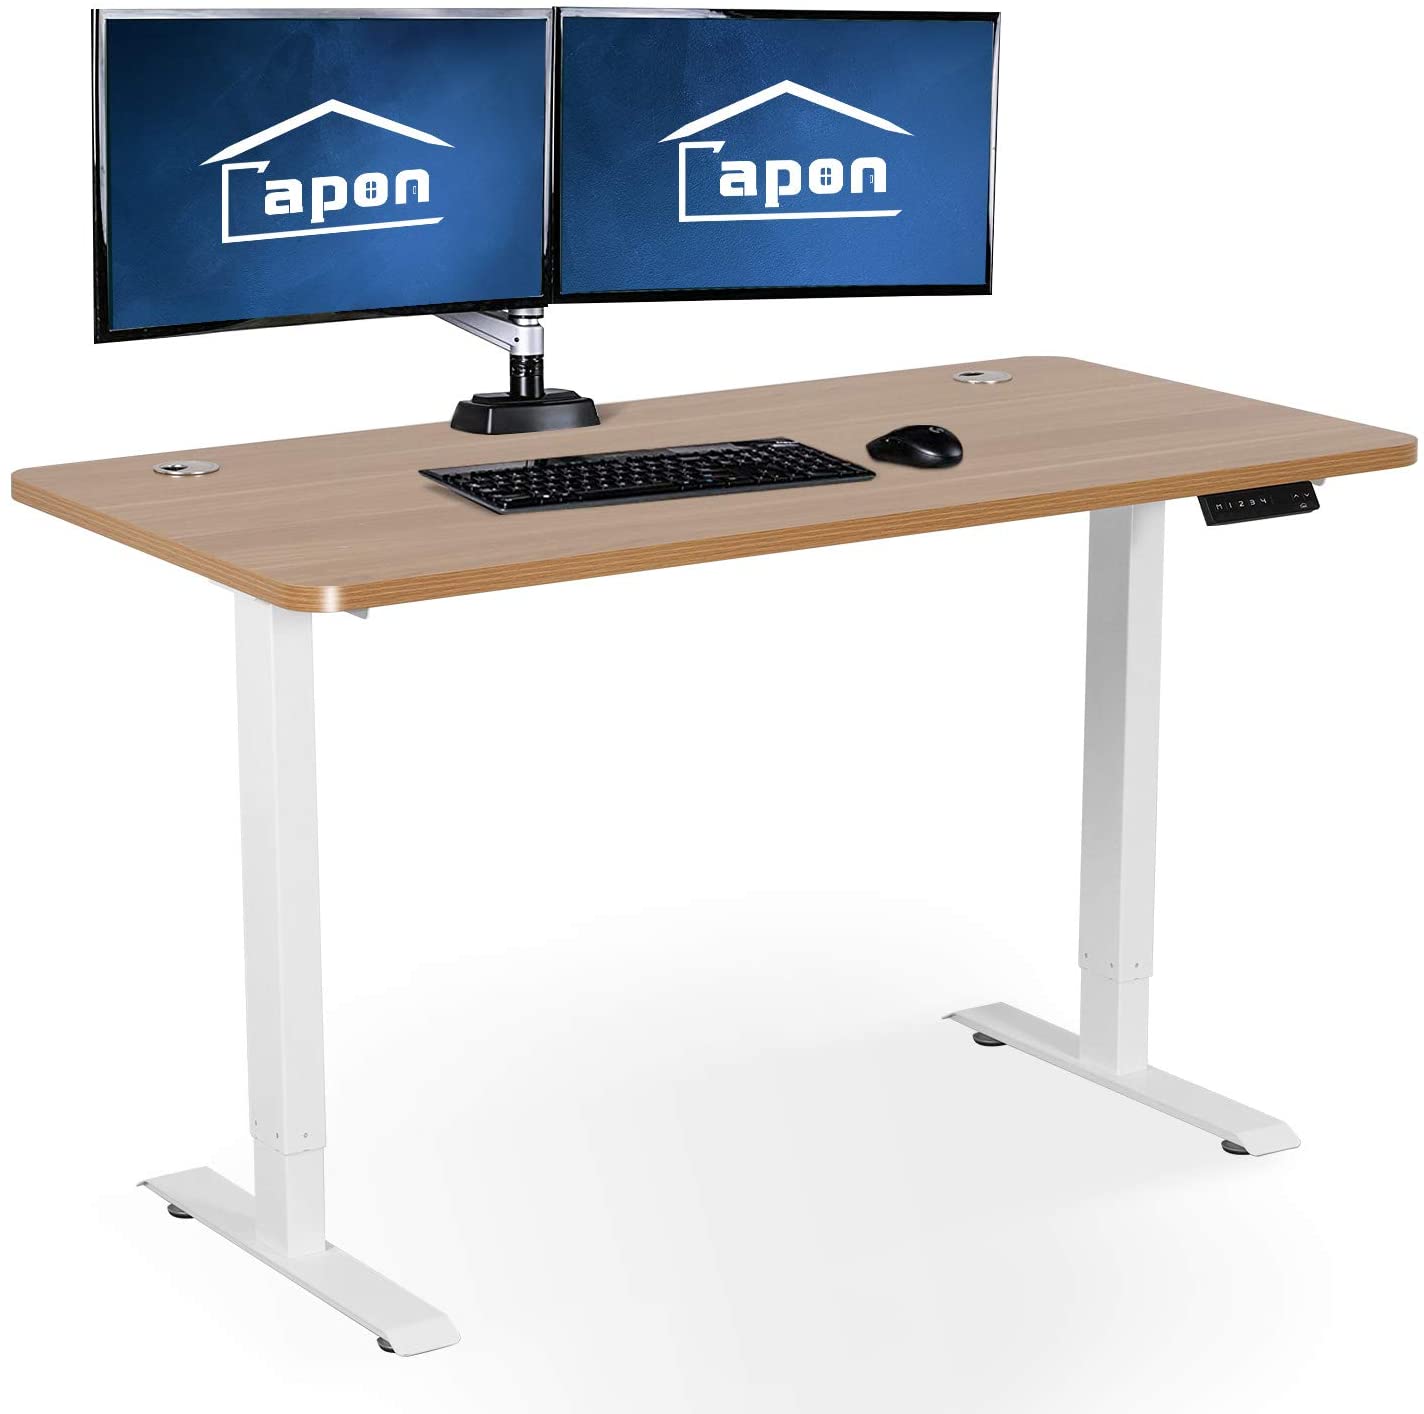 Standing Desk for Home Office, Adjustable Height Desk, 48 x 24 inch Capon Sitting and Standing Dual Motorized Gaming Desk, One Piece Top Electric Stand Up Desk, Natural